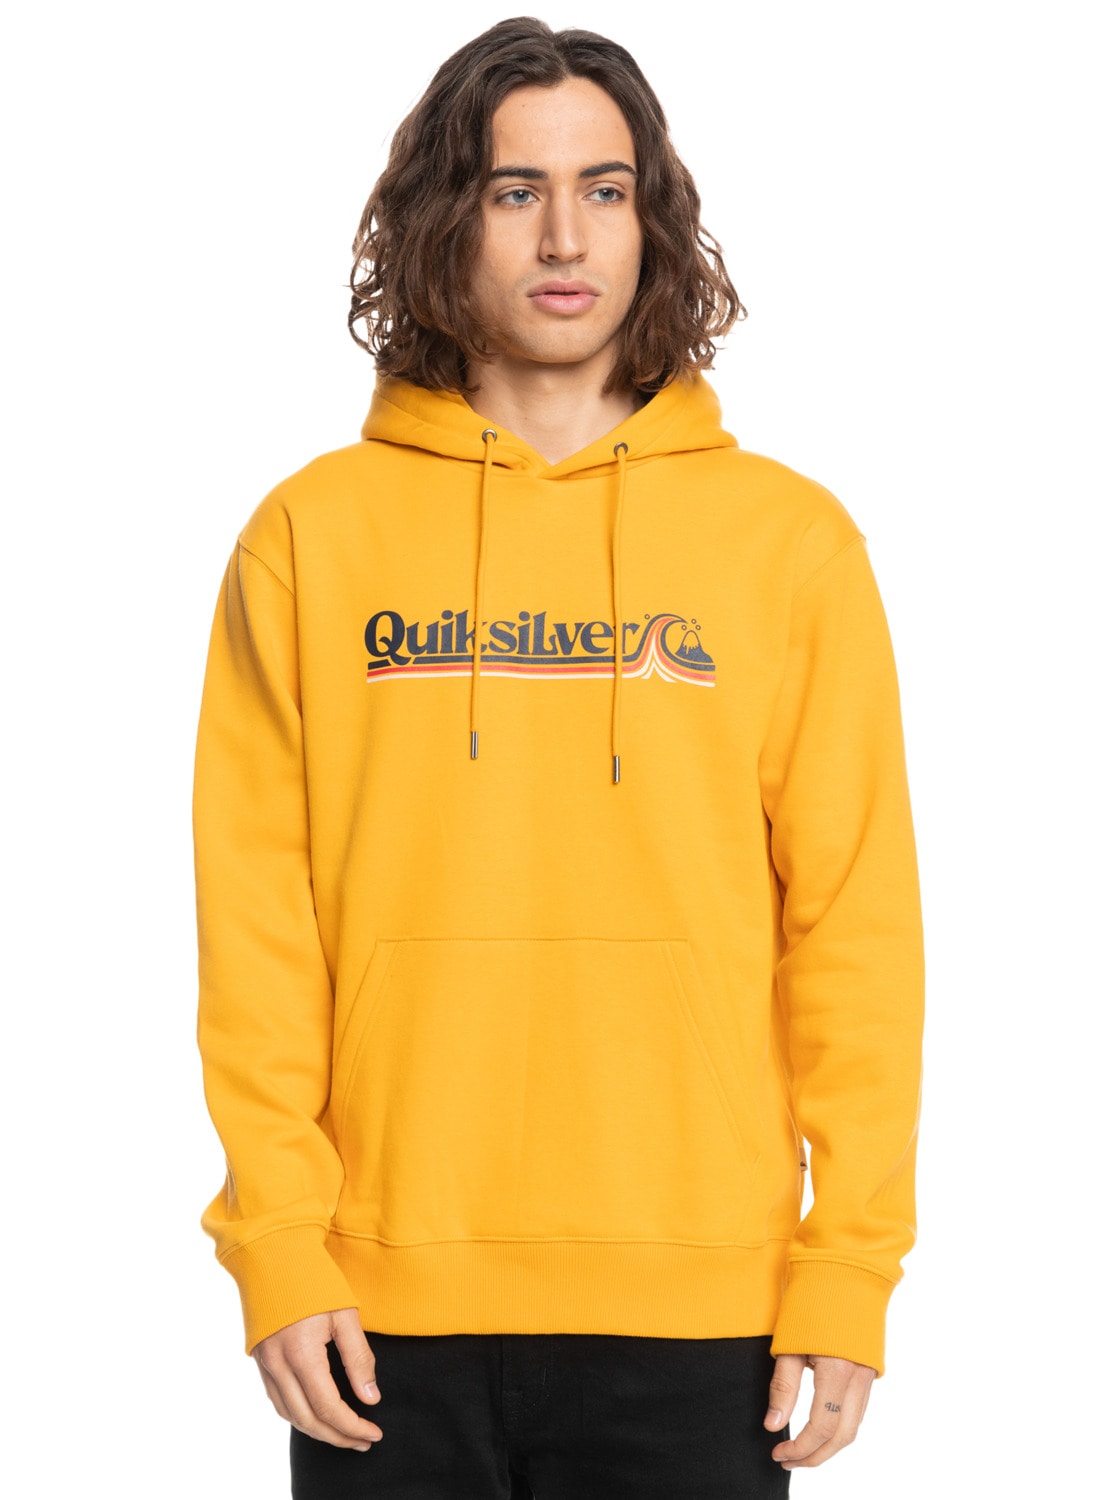 Quiksilver Hoodie »All Lined Up« von Quiksilver